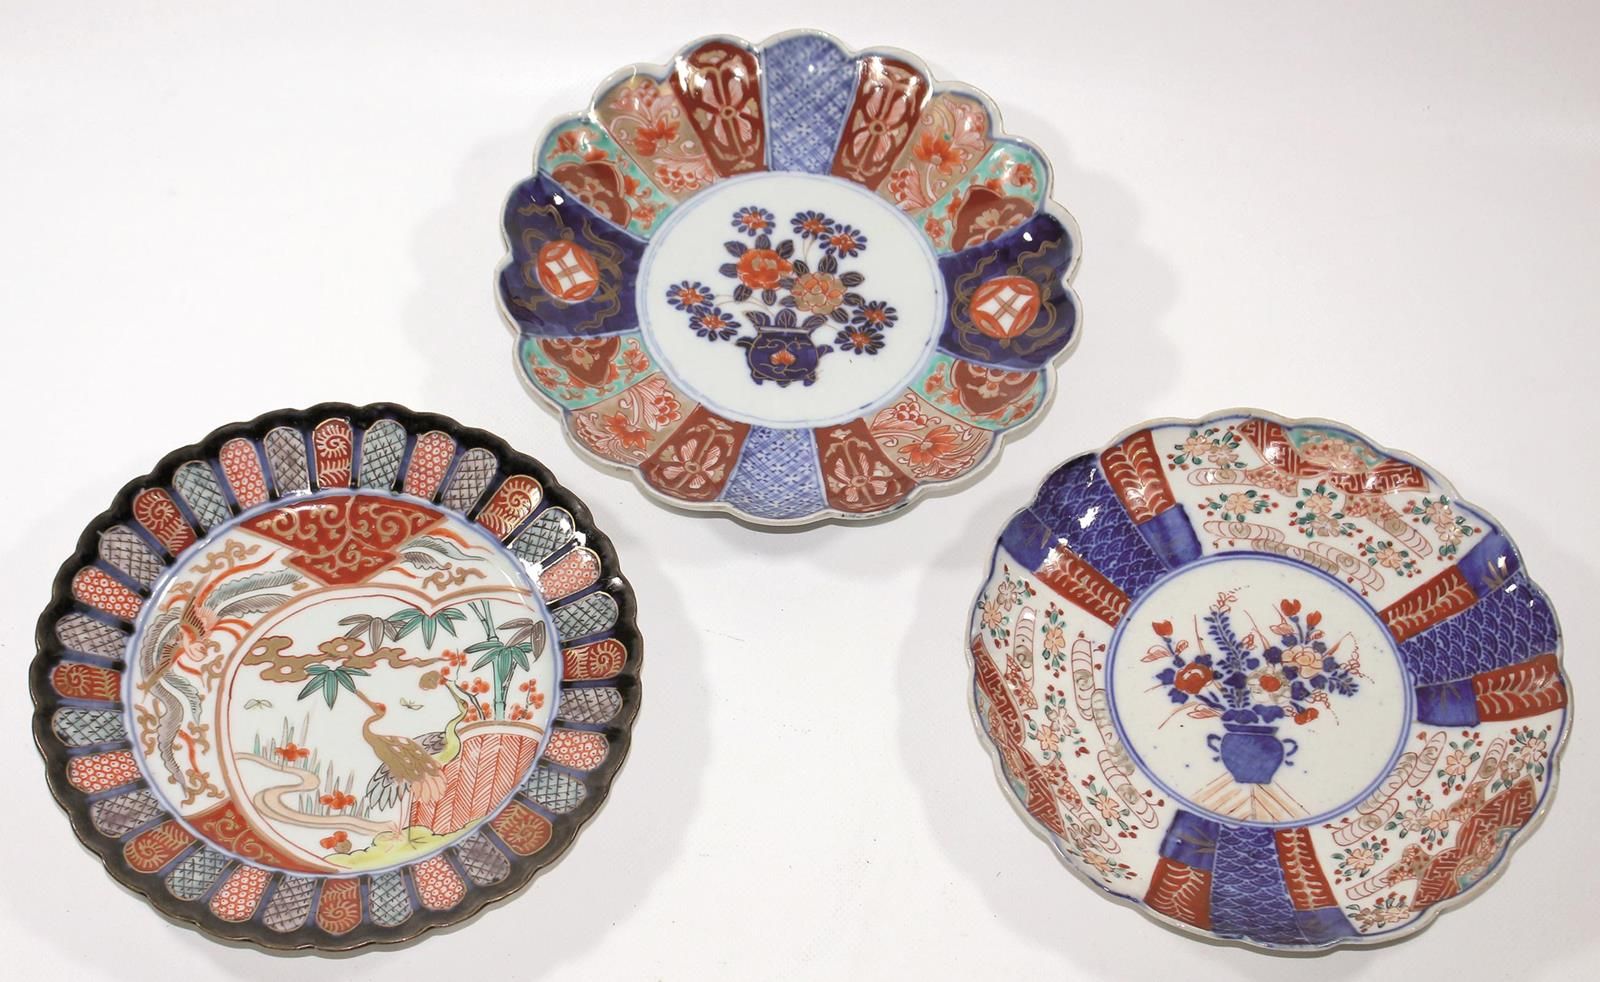 3 Imari Teller with polychrome, multi-pass cartouches. Probably 18th/19th c. D: &hellip;